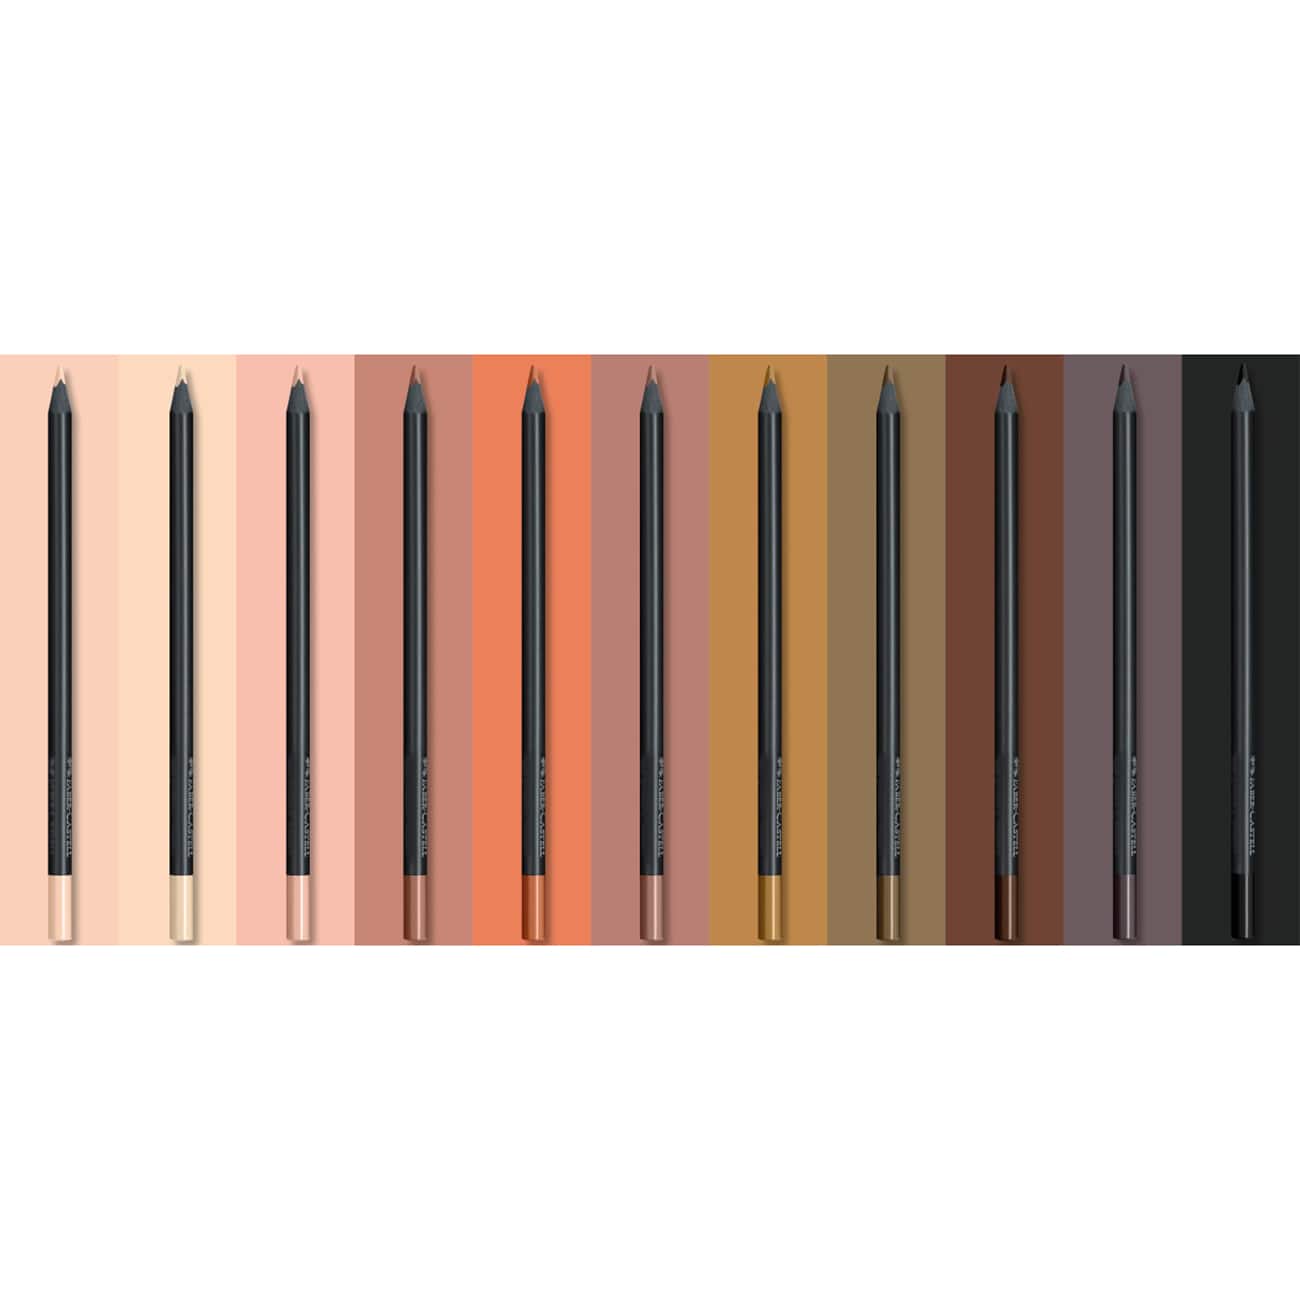 Faber-Castell&#xAE; Black Edition Skin Tones Colored Pencils